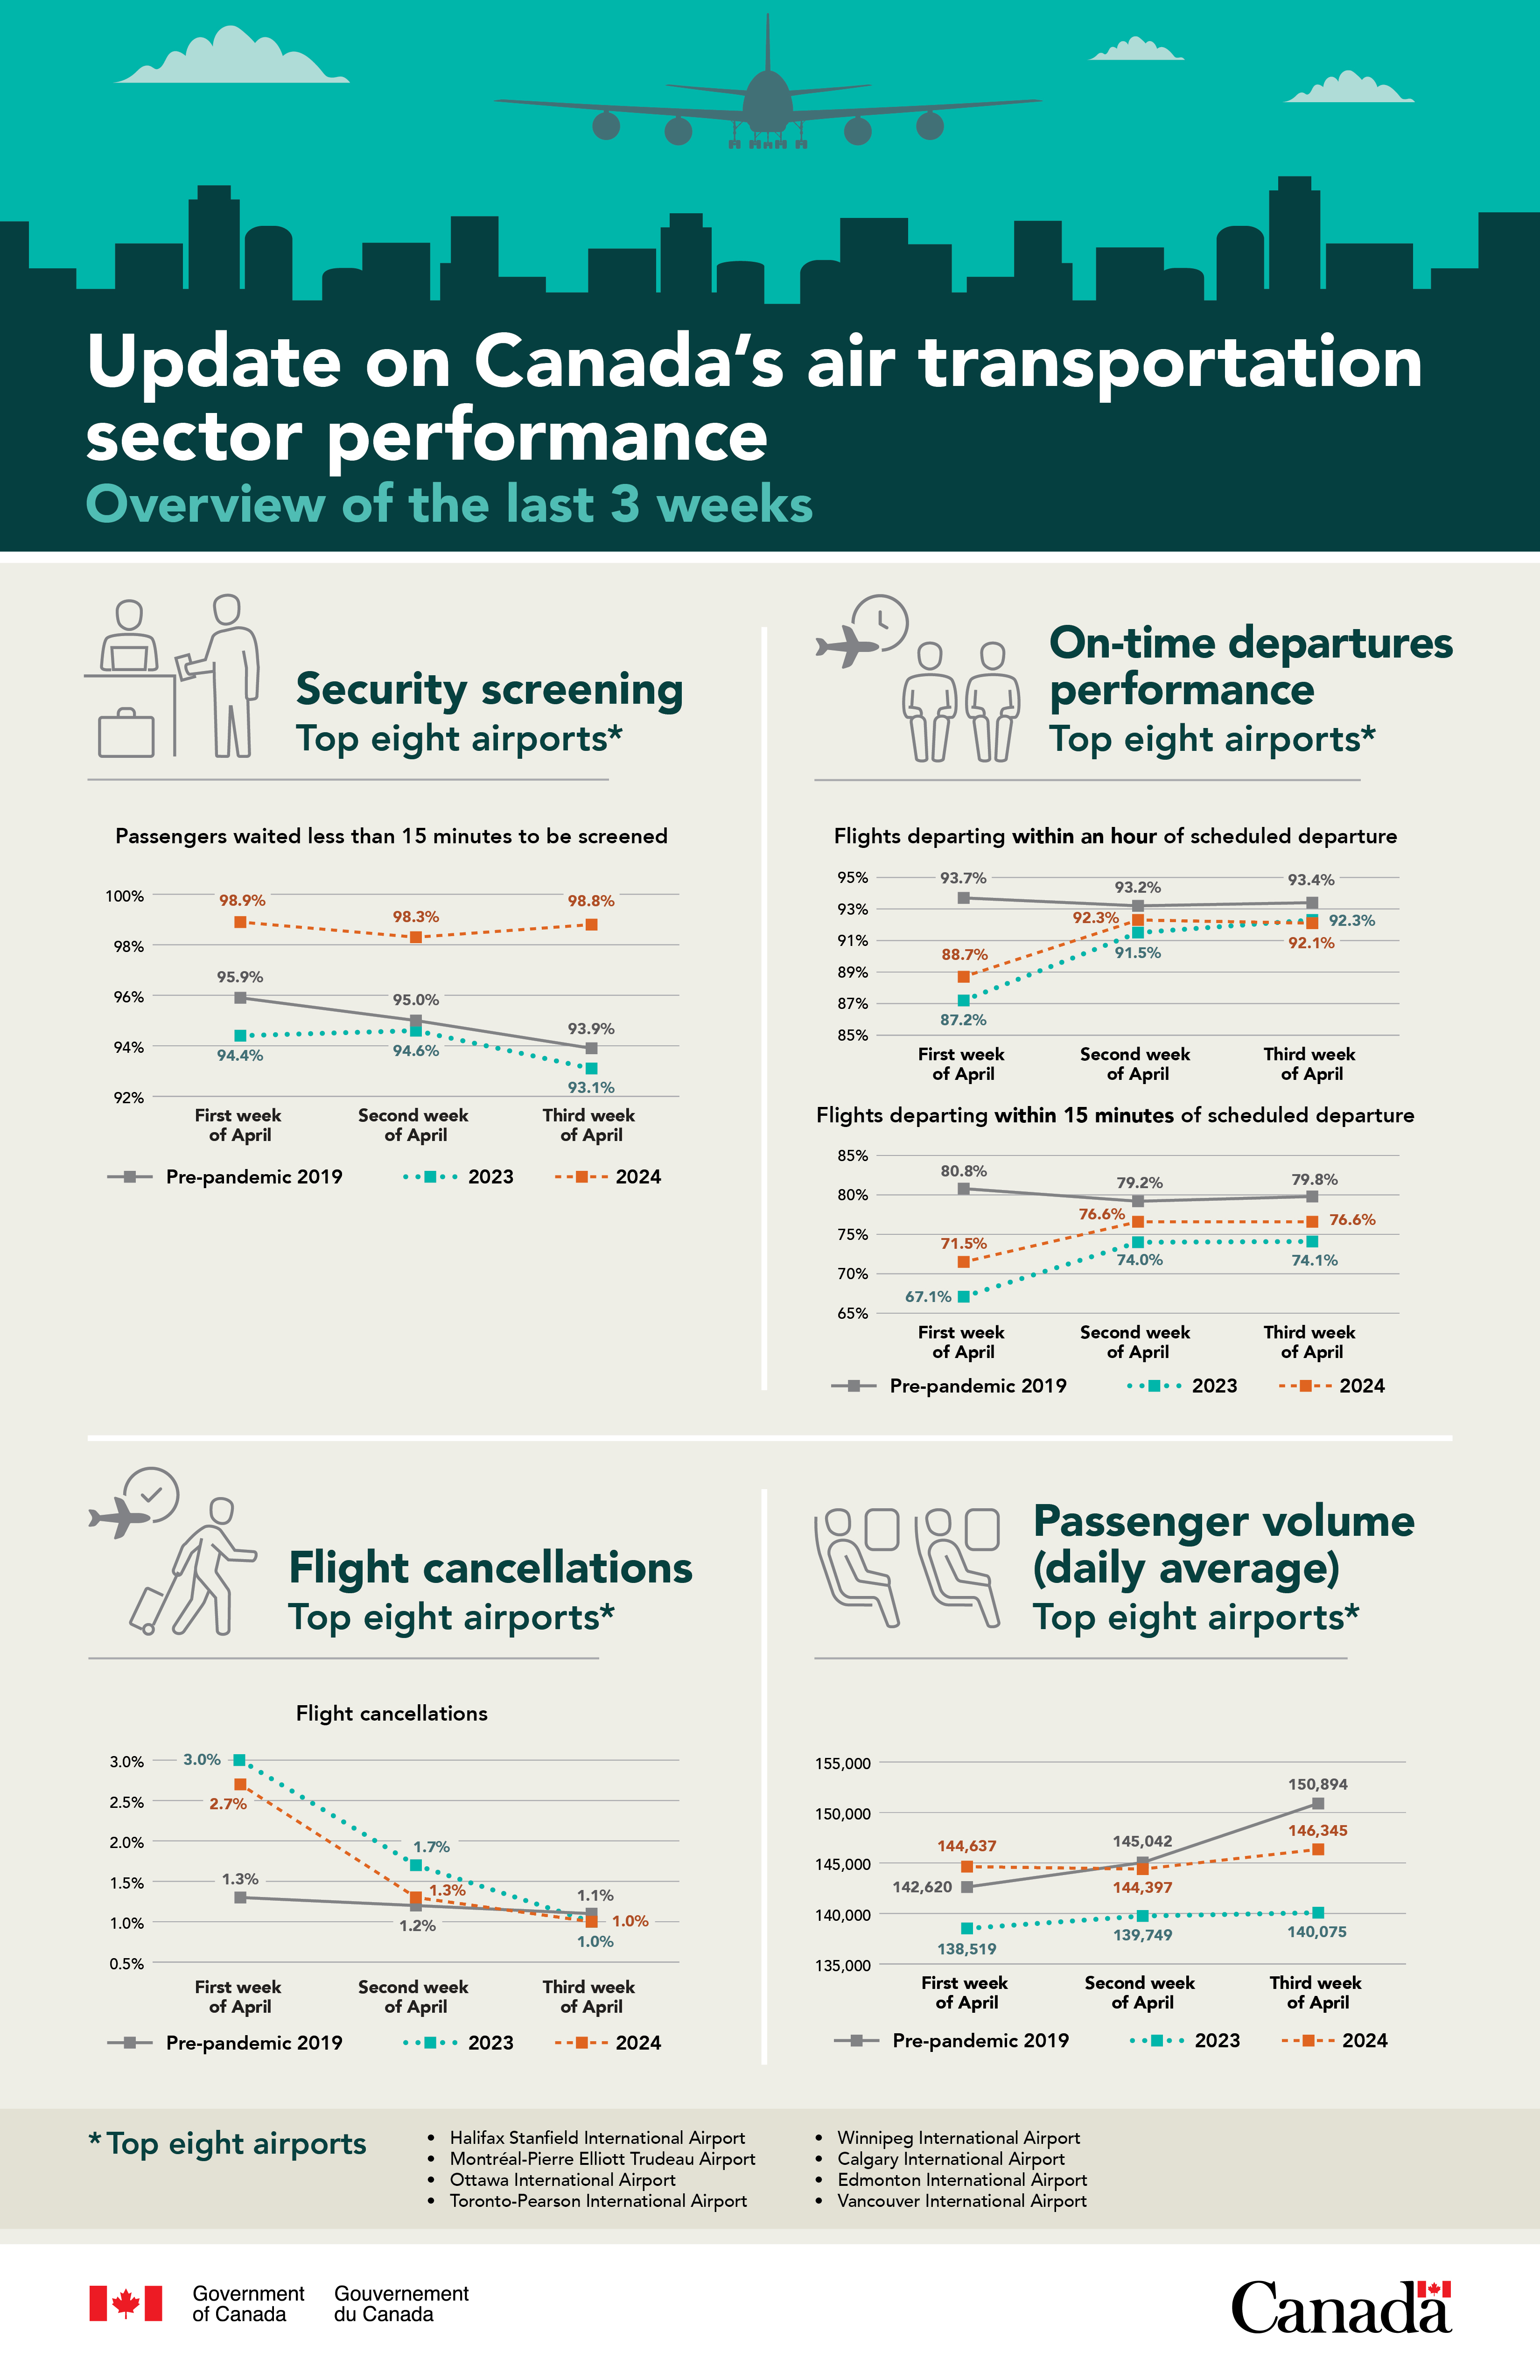 Update on Canada’s air transportation sector performance – Overview of the last 3 weeks